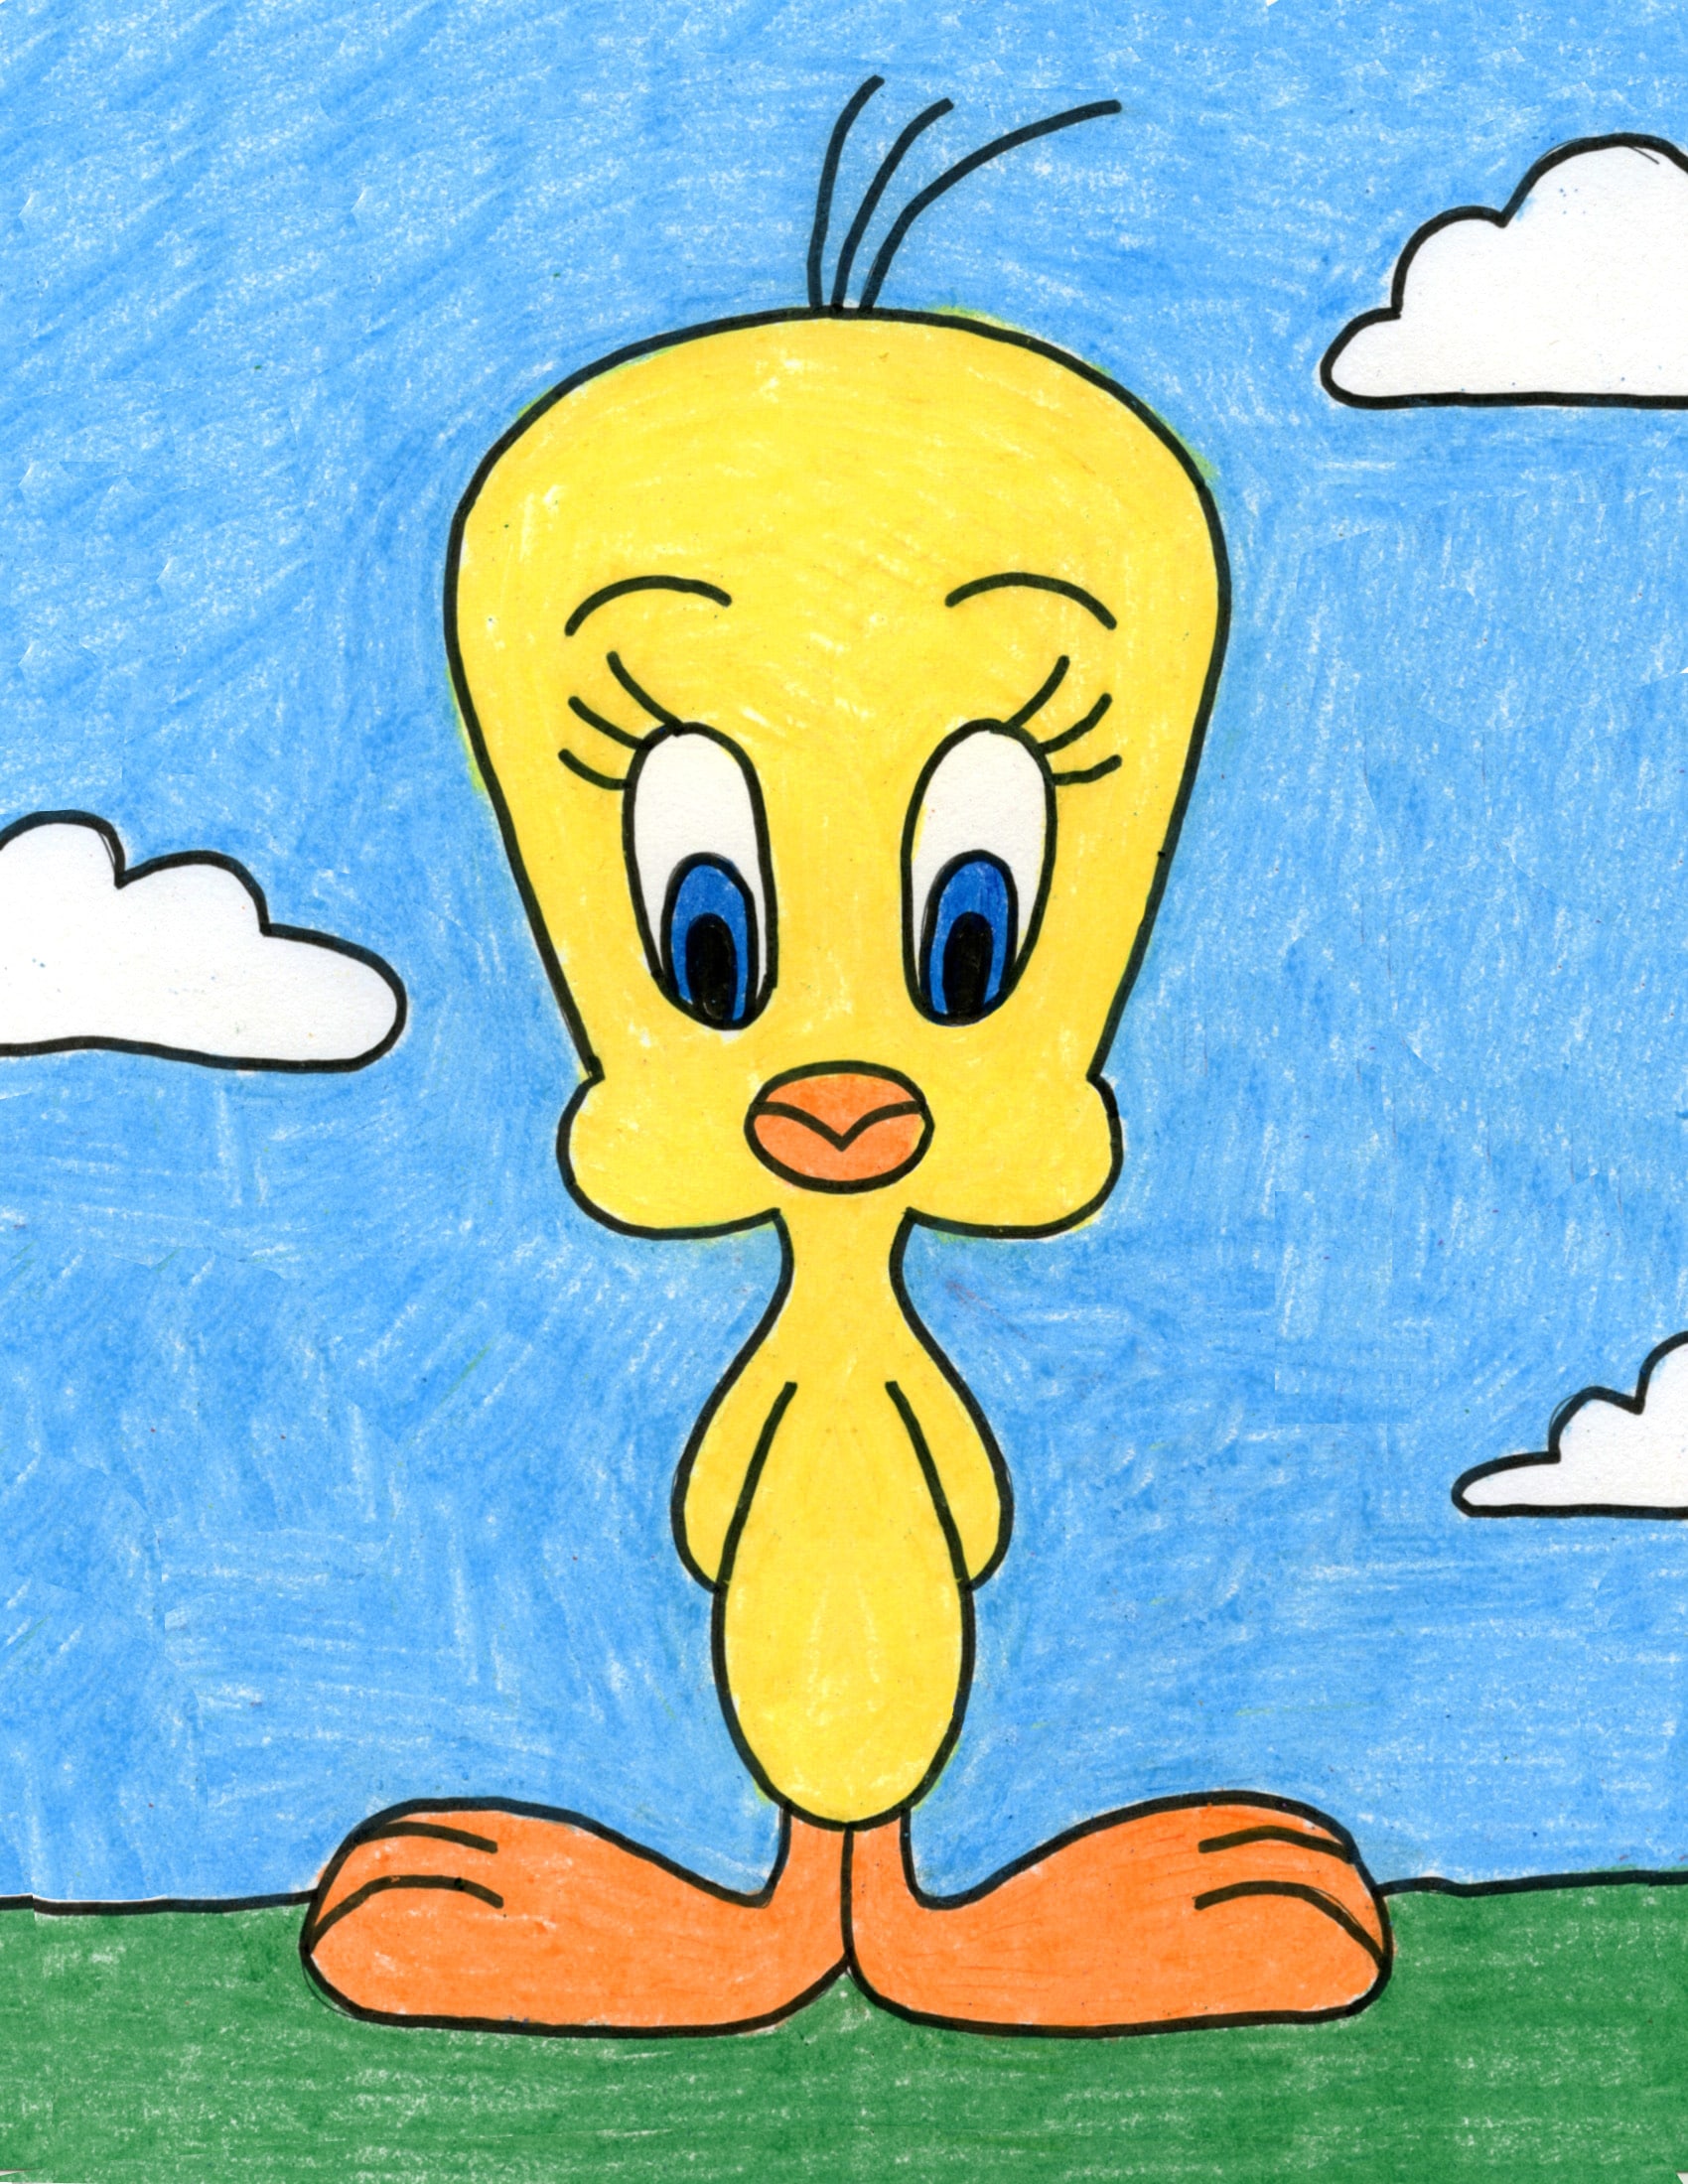 Easy How to Draw Tweety Bird Tutorial and Tweety Coloring Page